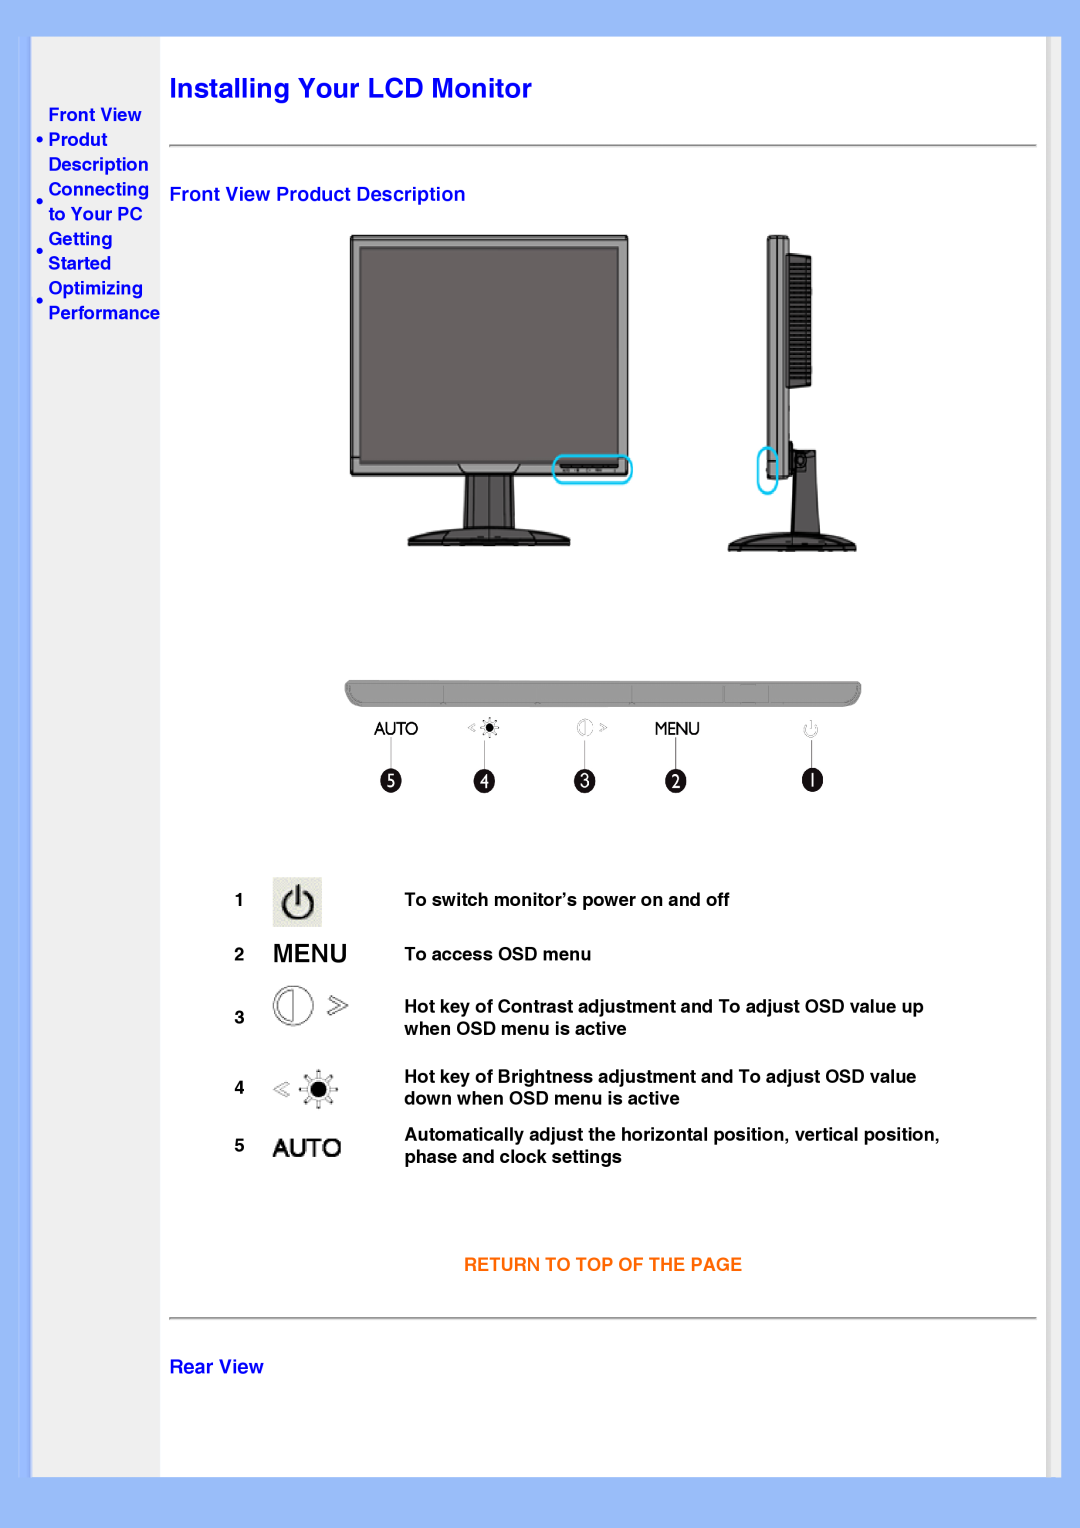 Philips 220VW8 Installing Your LCD Monitor, Menu, Front View Product Description, Rear View, Return To Top Of The Page 